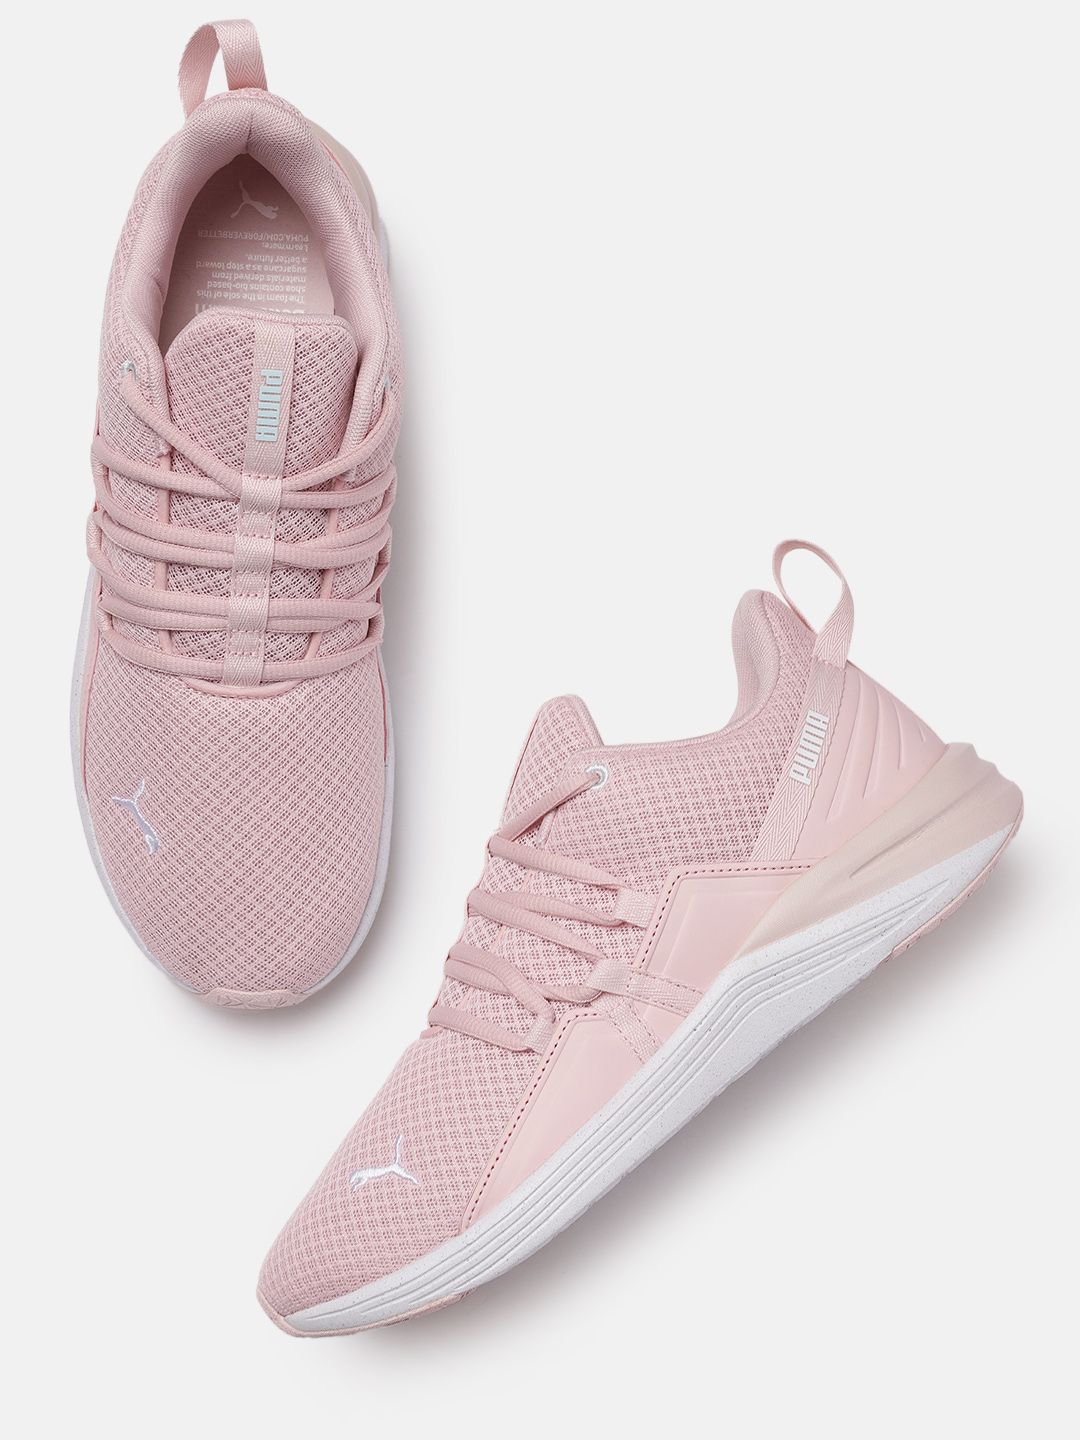 Puma Women Pink Solid Better Foam Prowl Alt Regular Training Or Gym Shoes Price in India